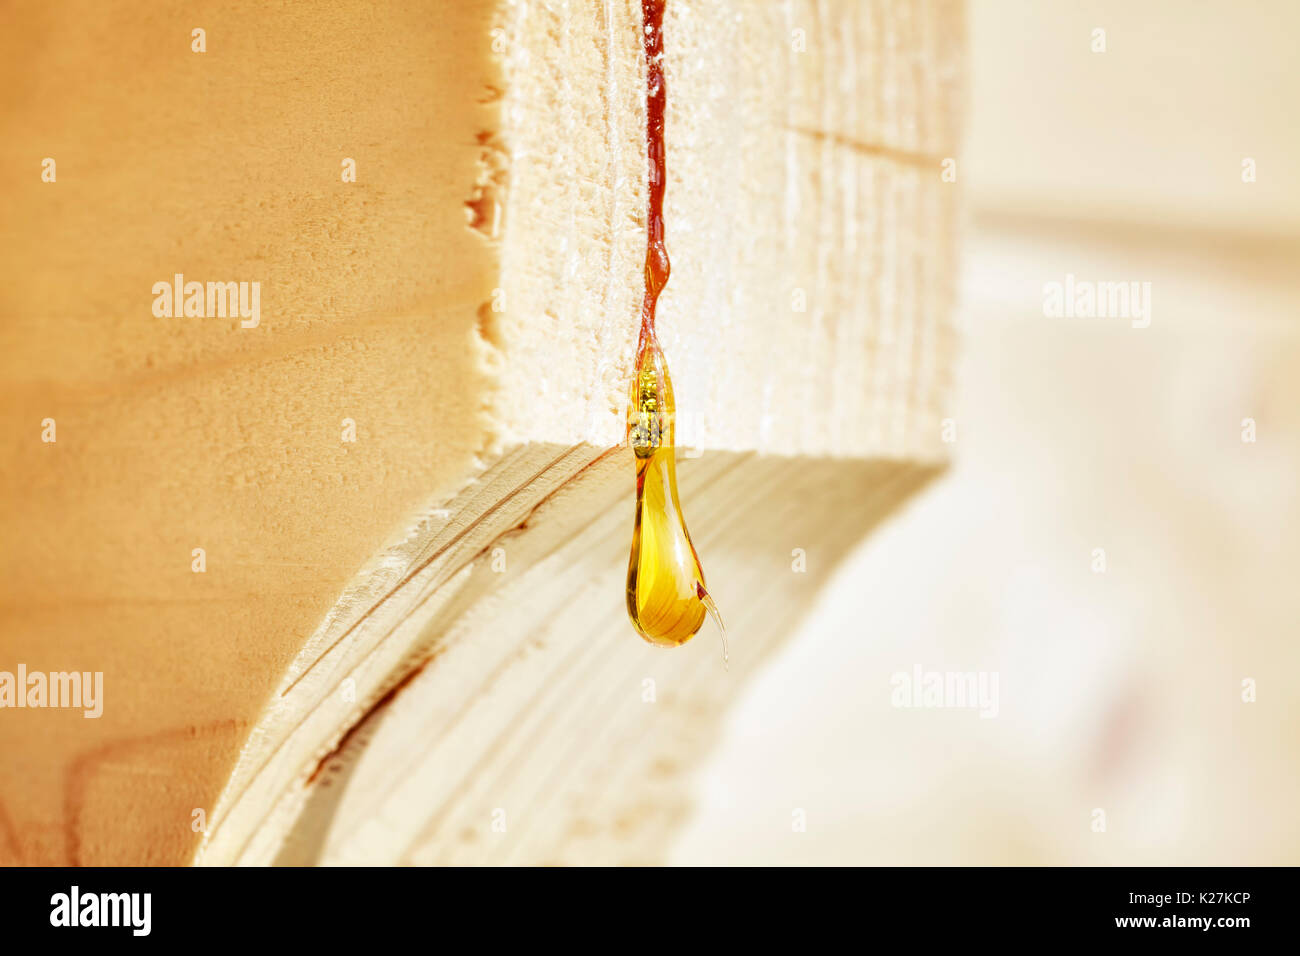 Close up picture of a resin drop on a wood construction, shallow depth of field. Stock Photo